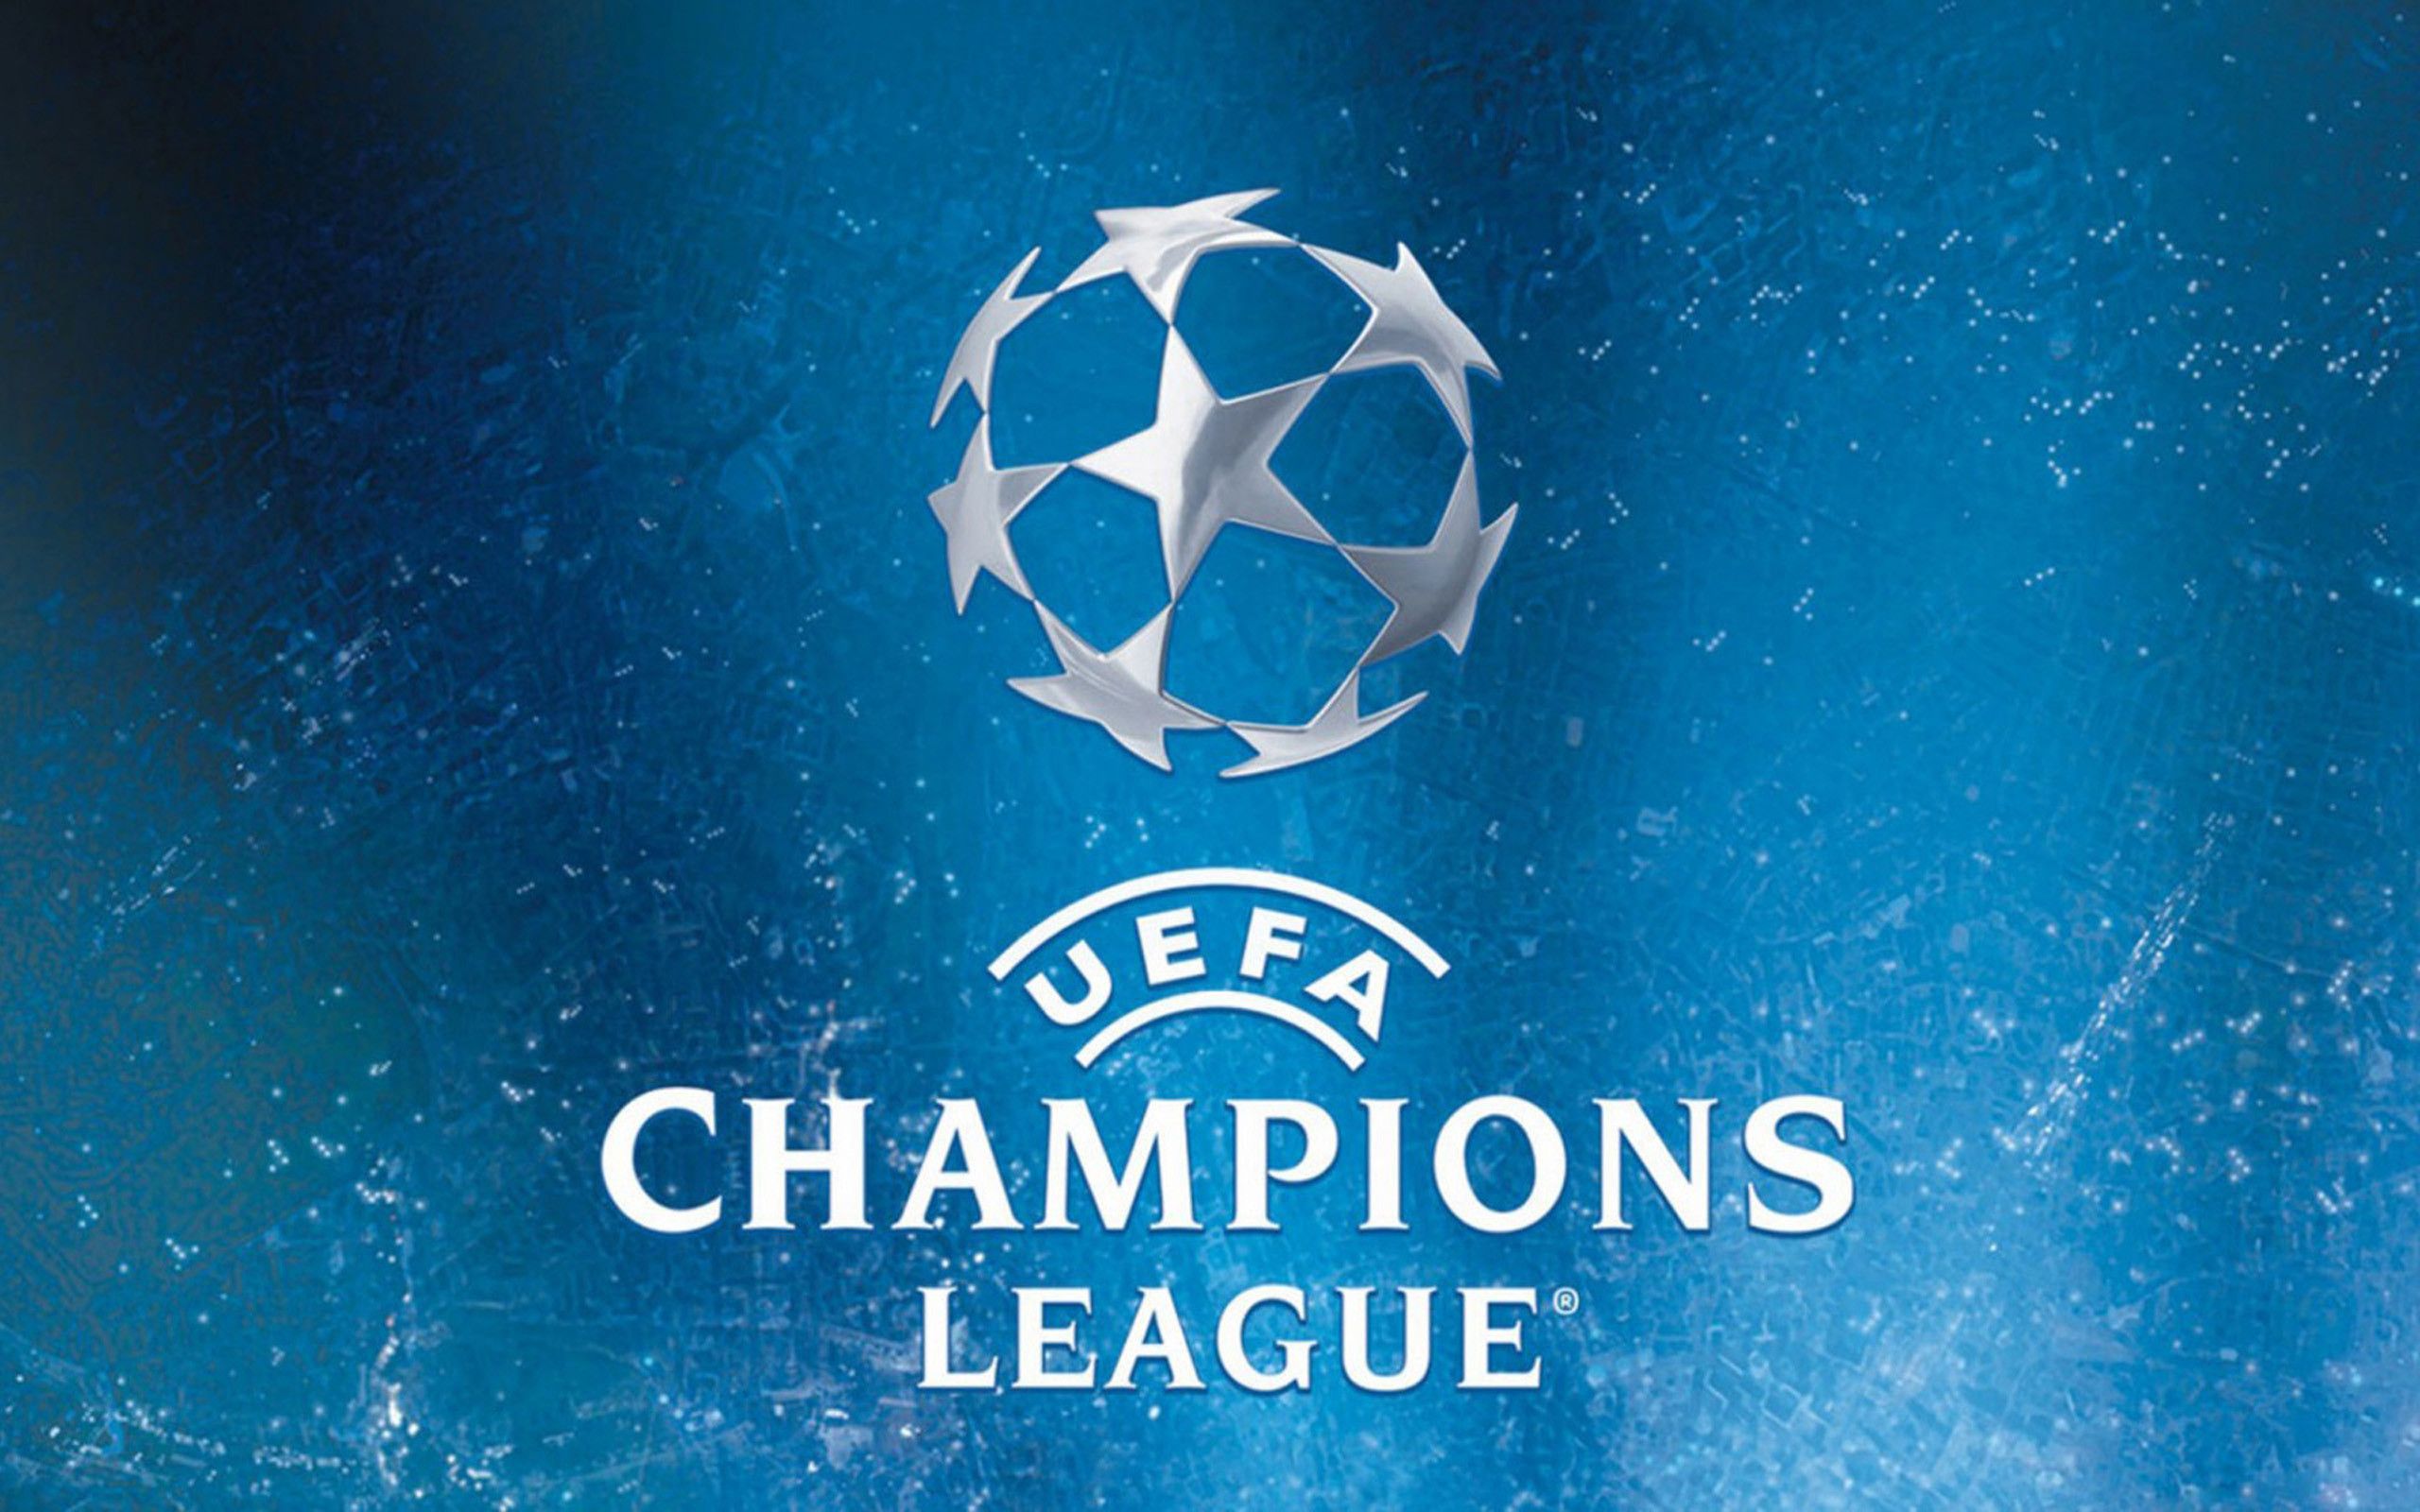 Download wallpaper UEFA Champions League, logo, blue background, creative, UEFA for desktop with resolution 2560x1600. High Quality HD picture wallpaper